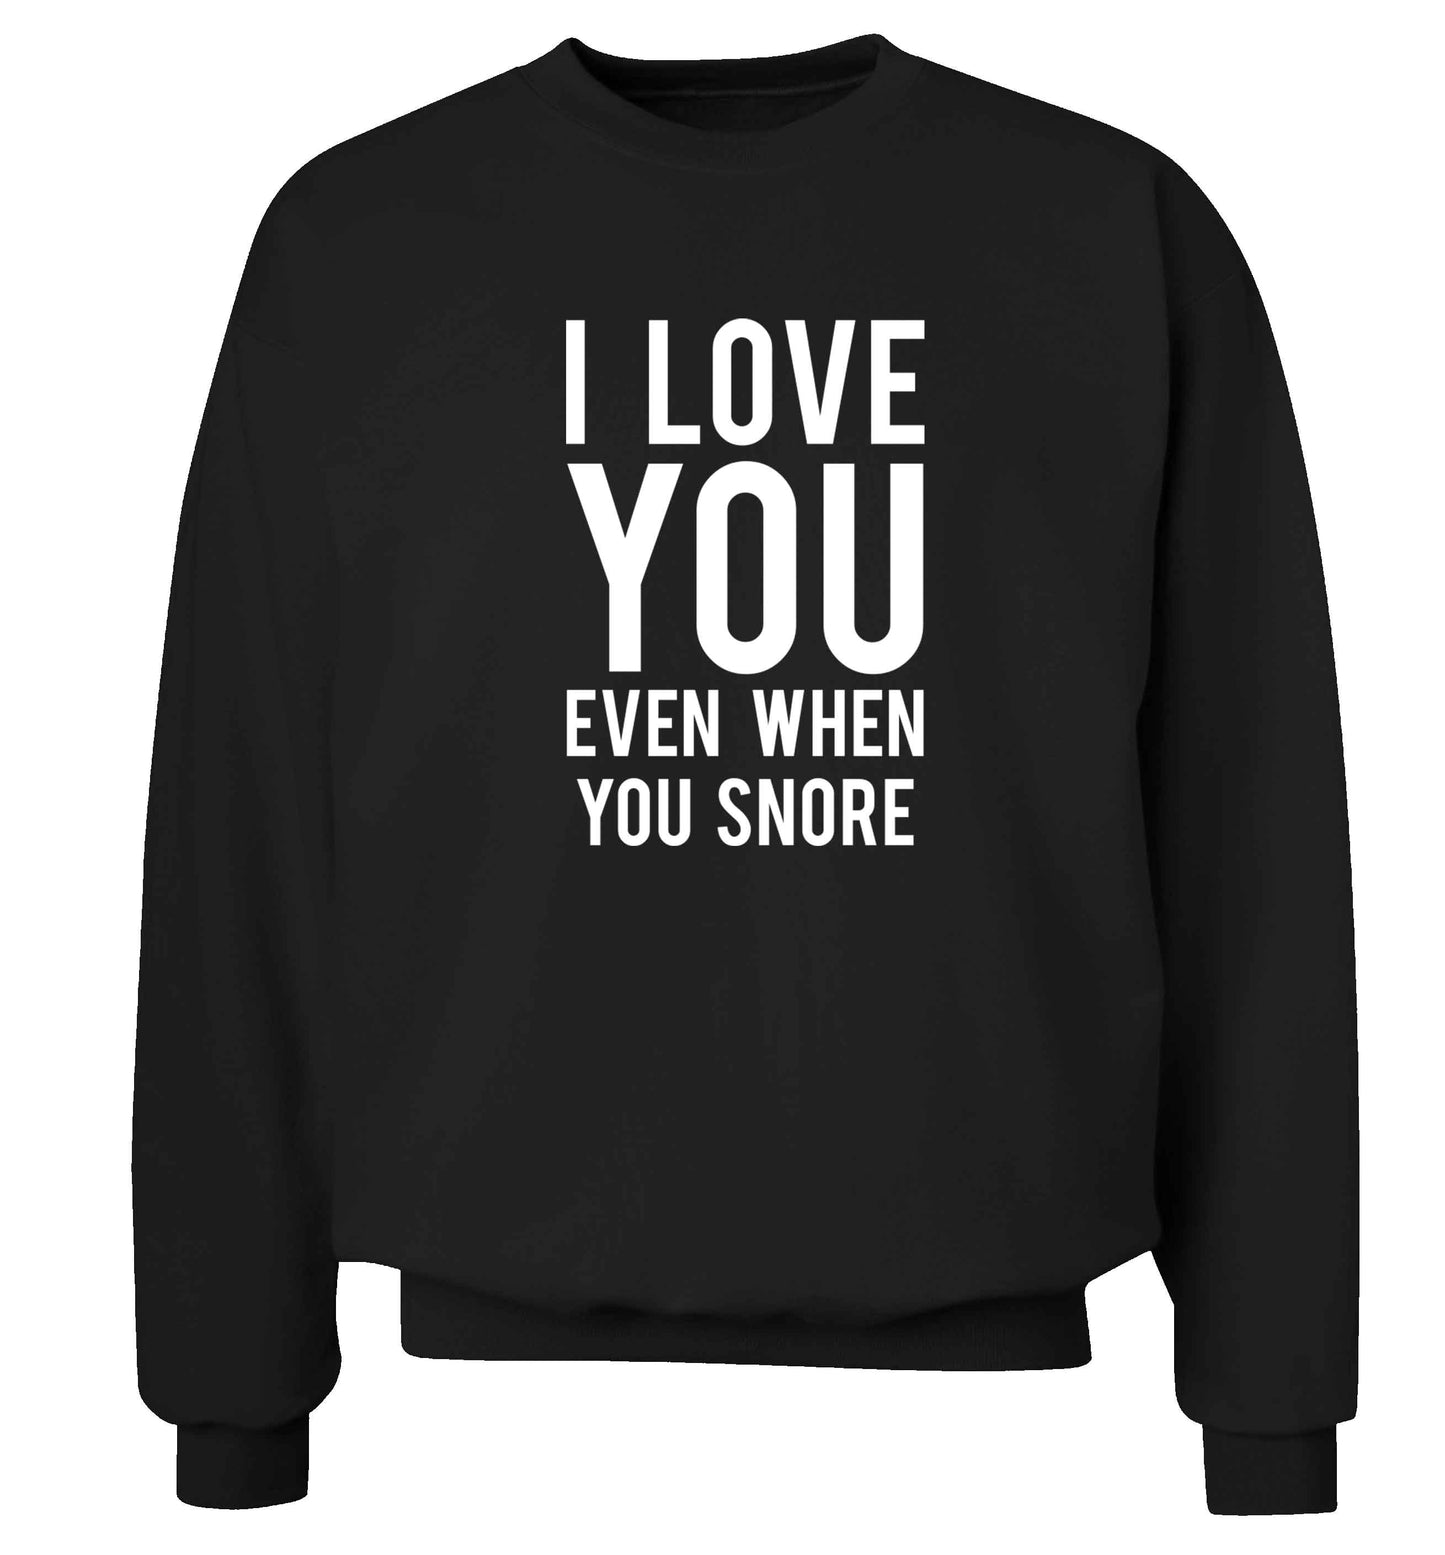 I love you even when you snore adult's unisex black sweater 2XL